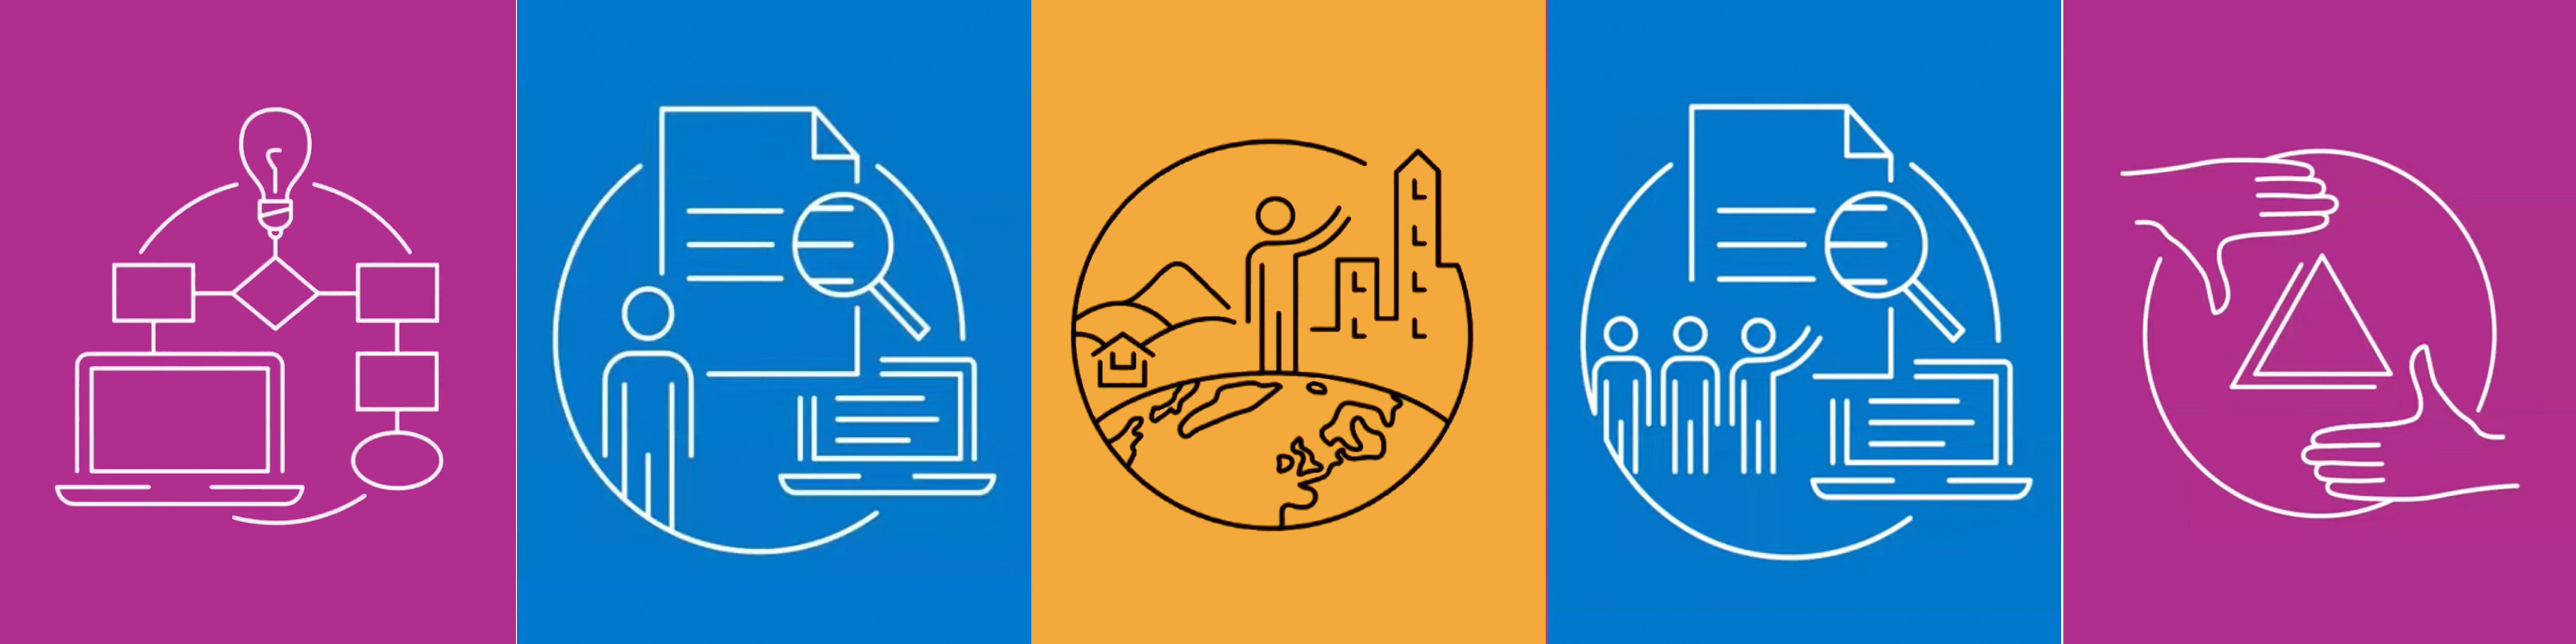 grid of five icons on different color backgrounds representing five ap courses